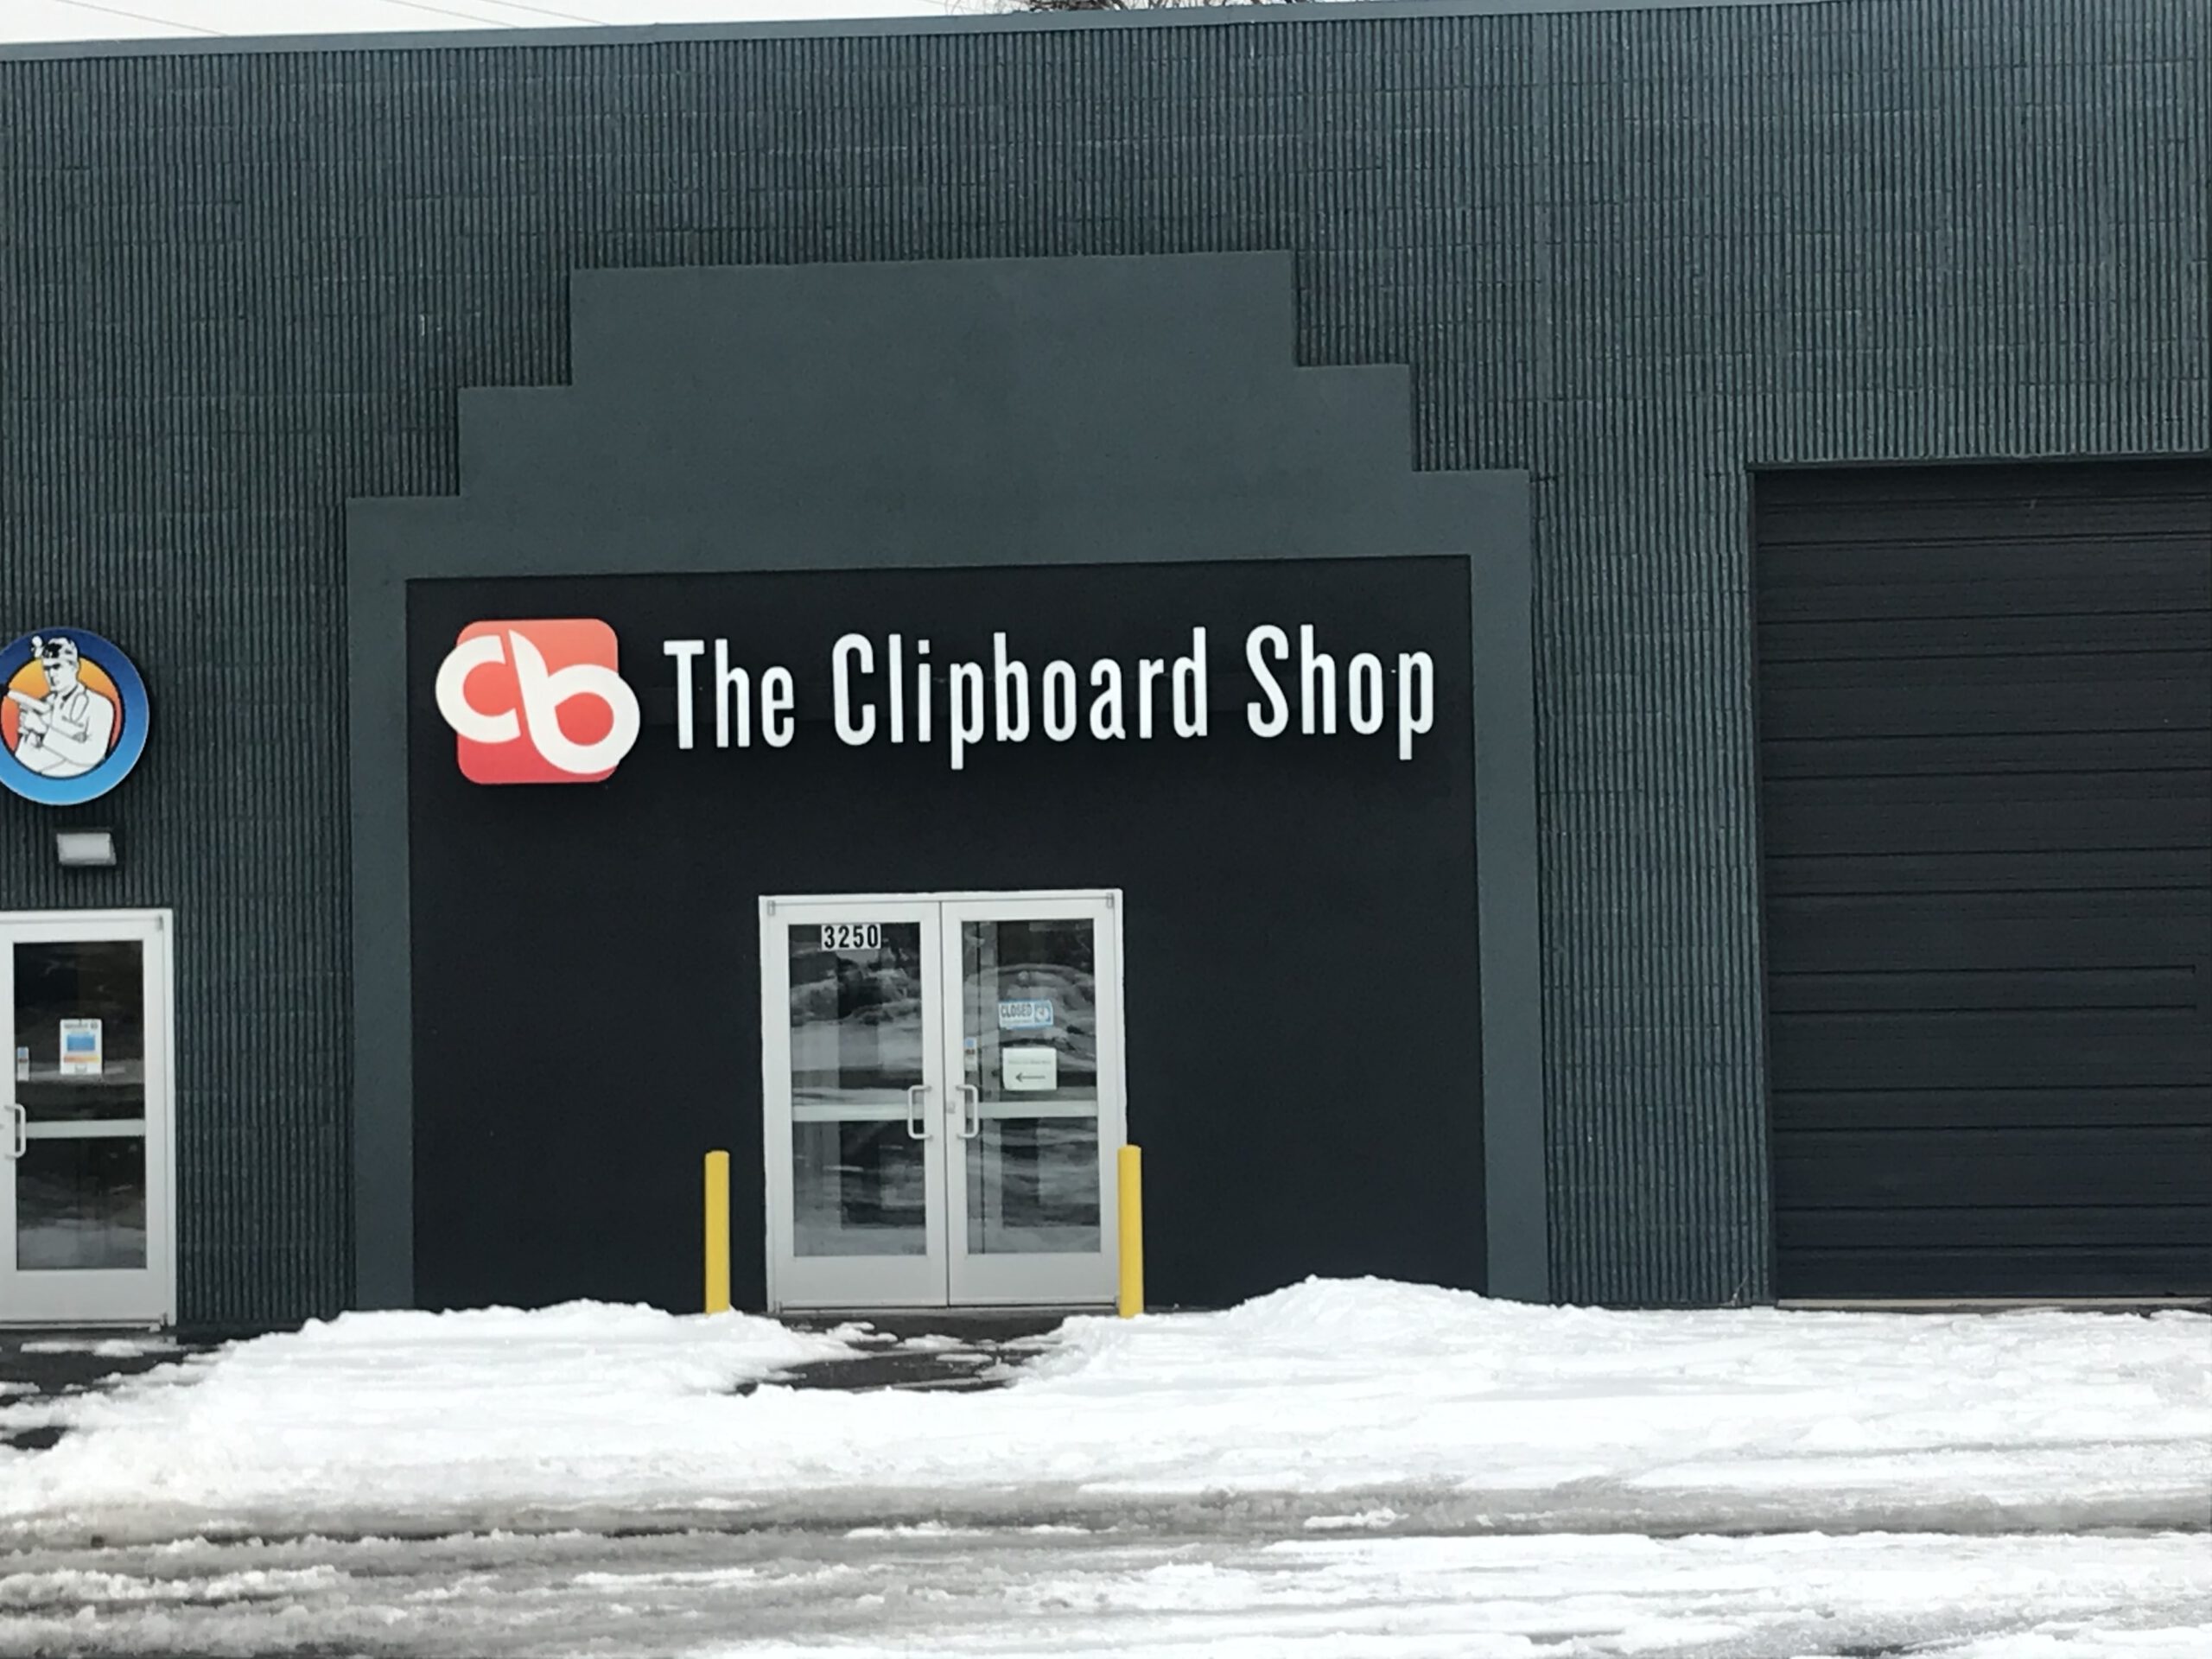 The Clipboard Shop Channel Letter Sign